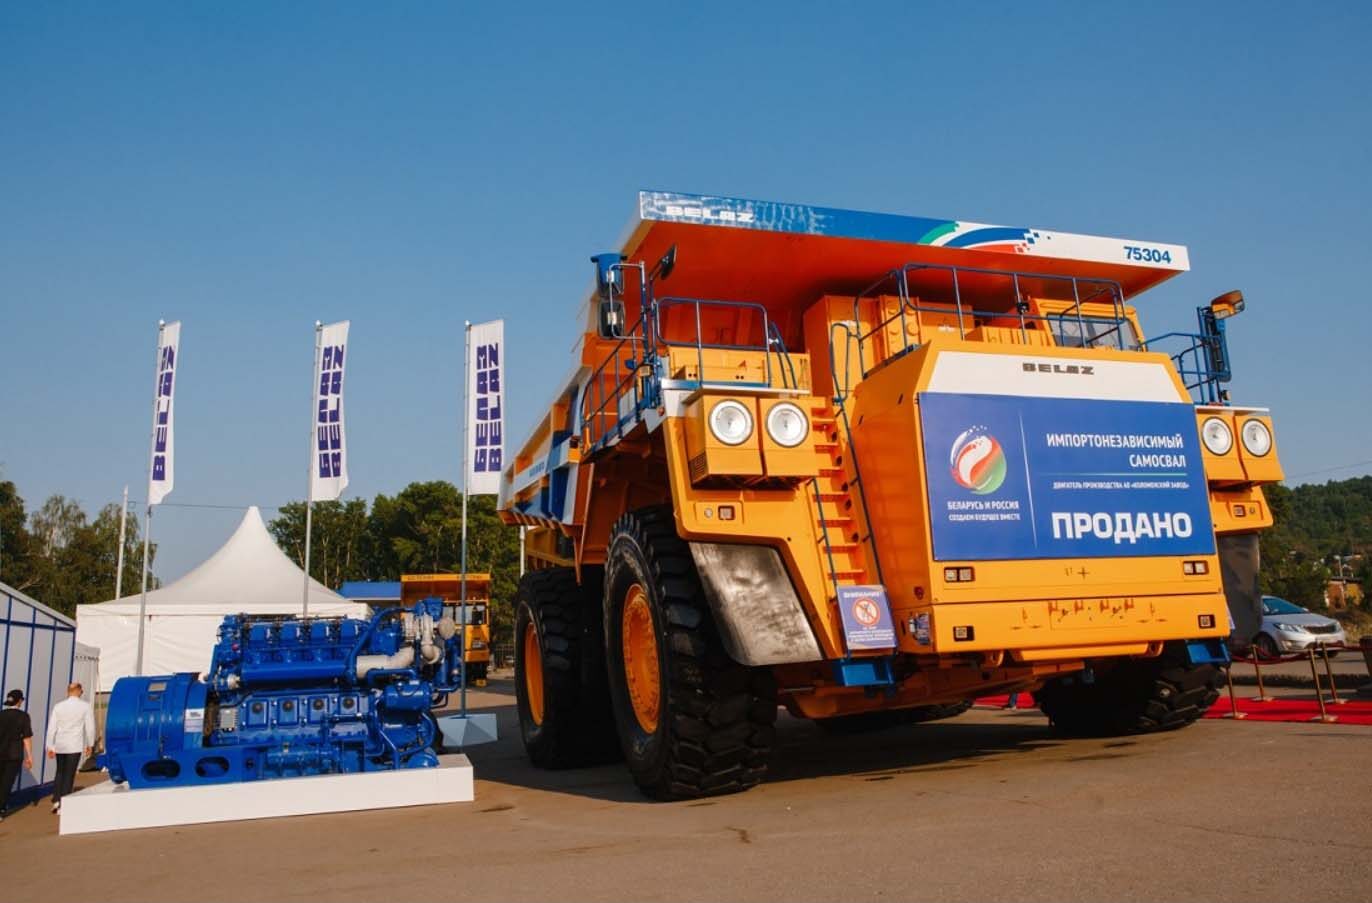 BELAZ-75304 with the 16-36DG diesel engine by the Kolomna Plant at the Coal and Mining exhibition in Novokuznetsk, Russia